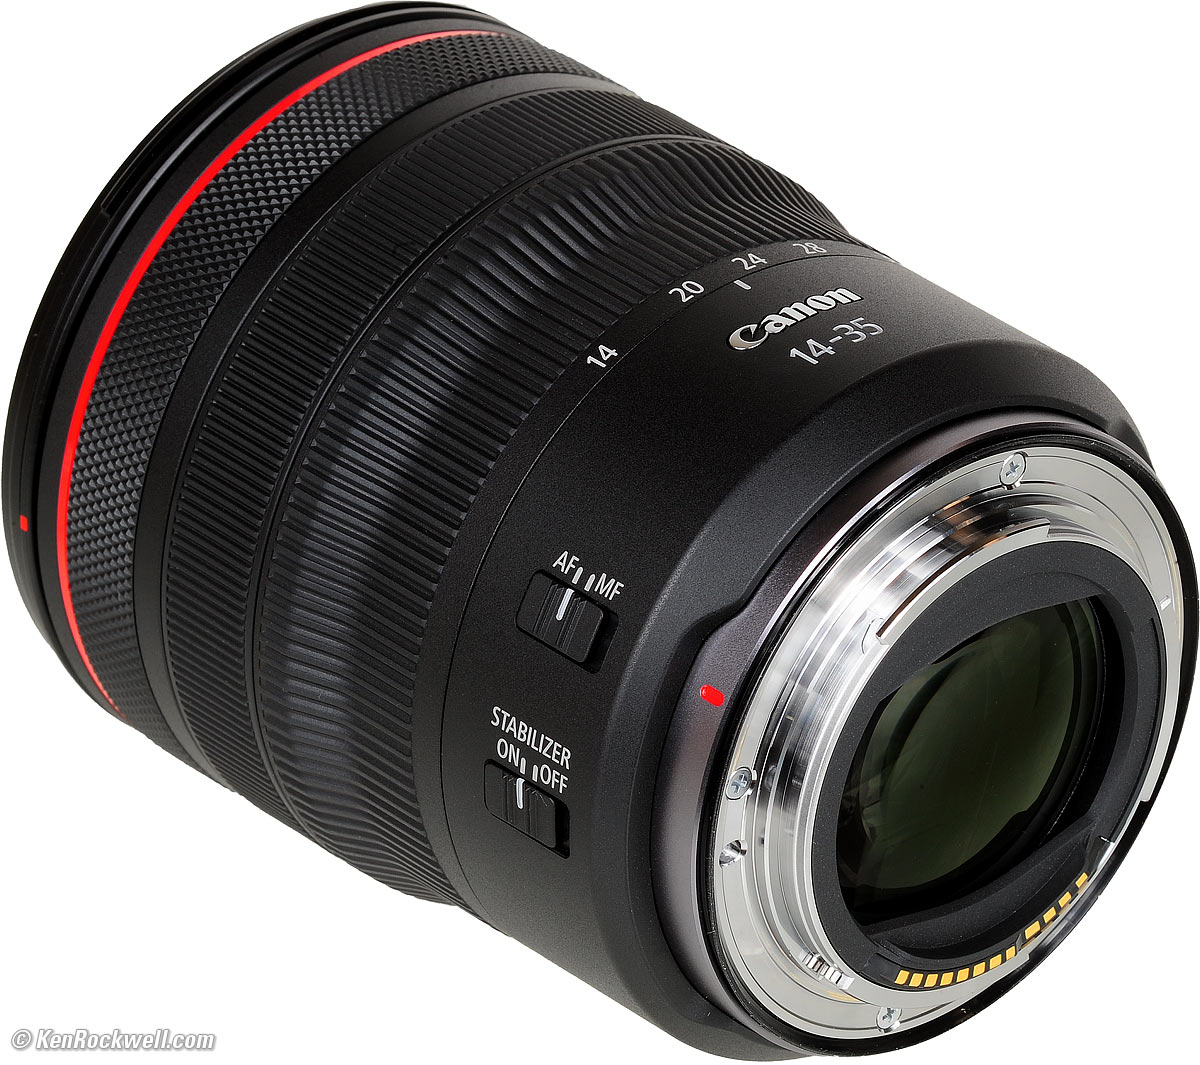 Canon RF14-35mm F4L IS USM Ultra-Wide-Angle Zoom Lens for EOS R